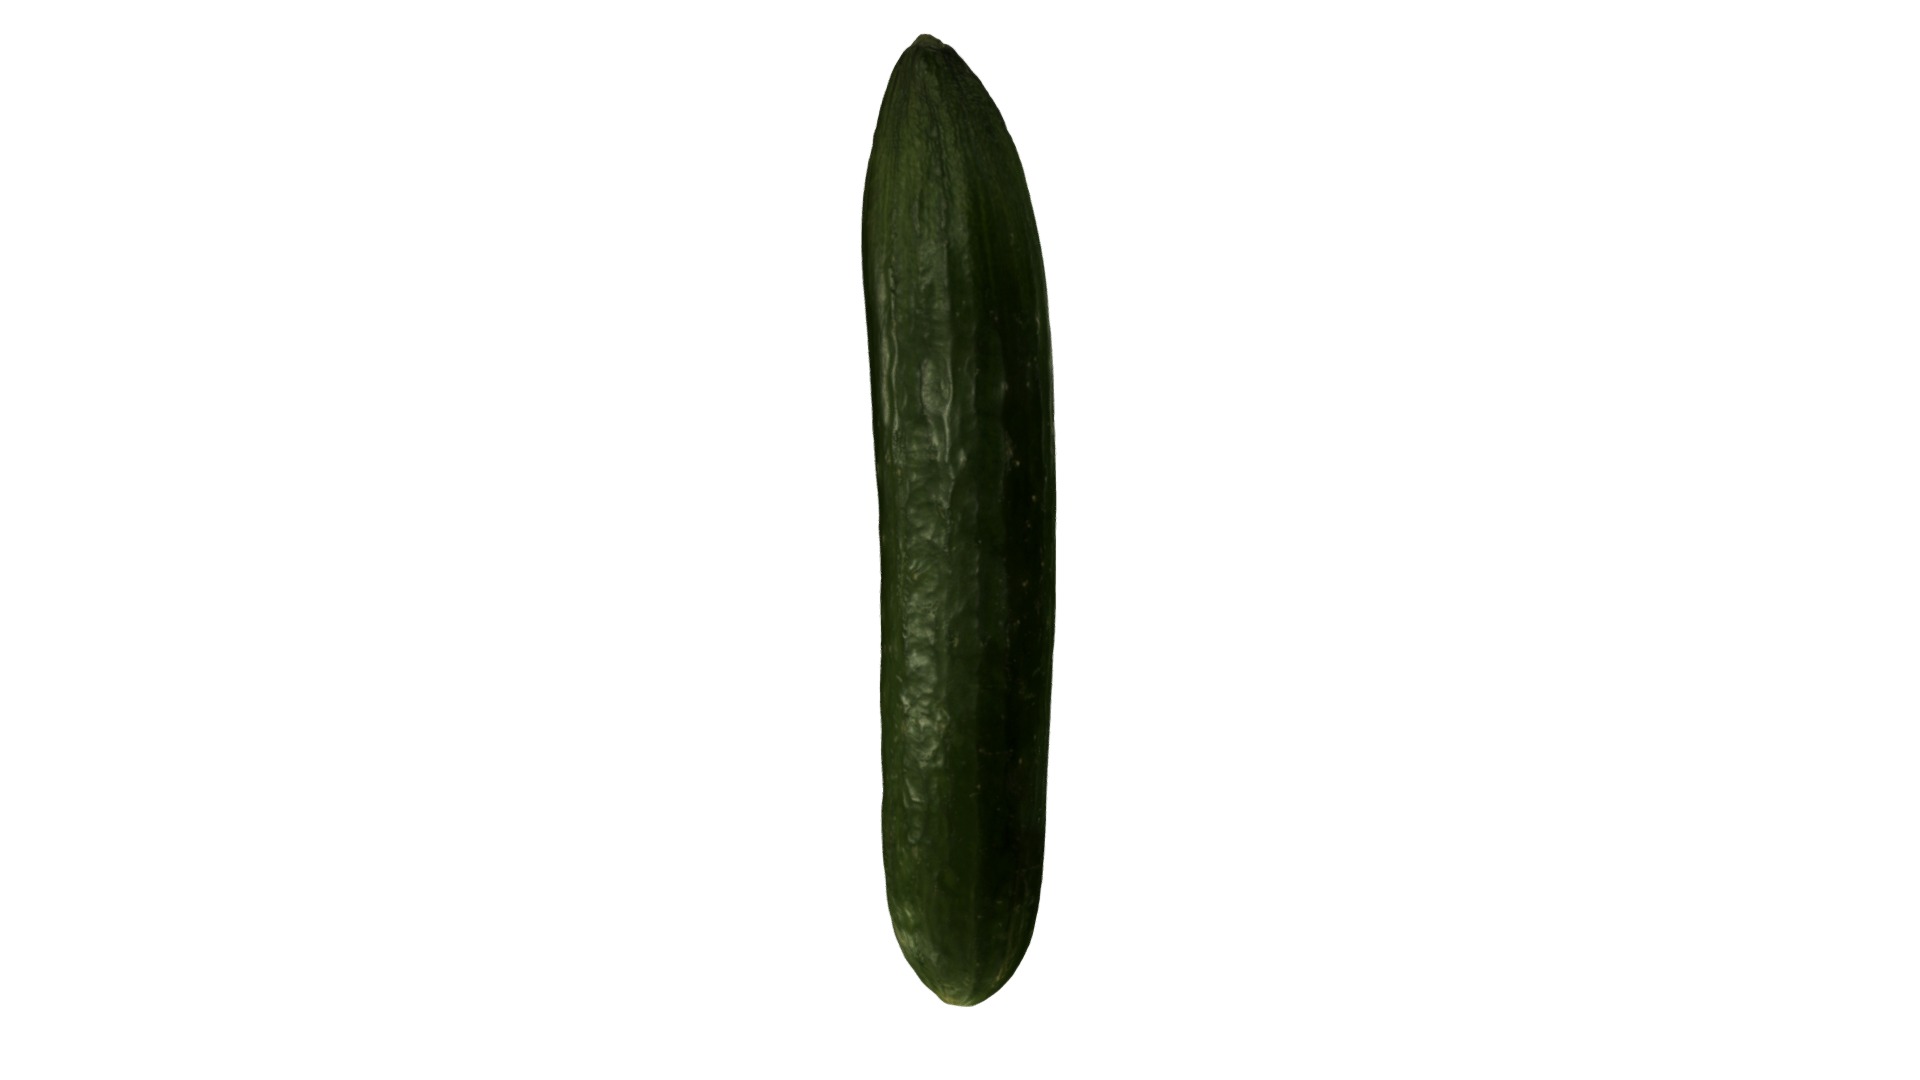 3D model Cucumber scan 3D - This is a 3D model of the Cucumber scan 3D. The 3D model is about a green and black vegetable.